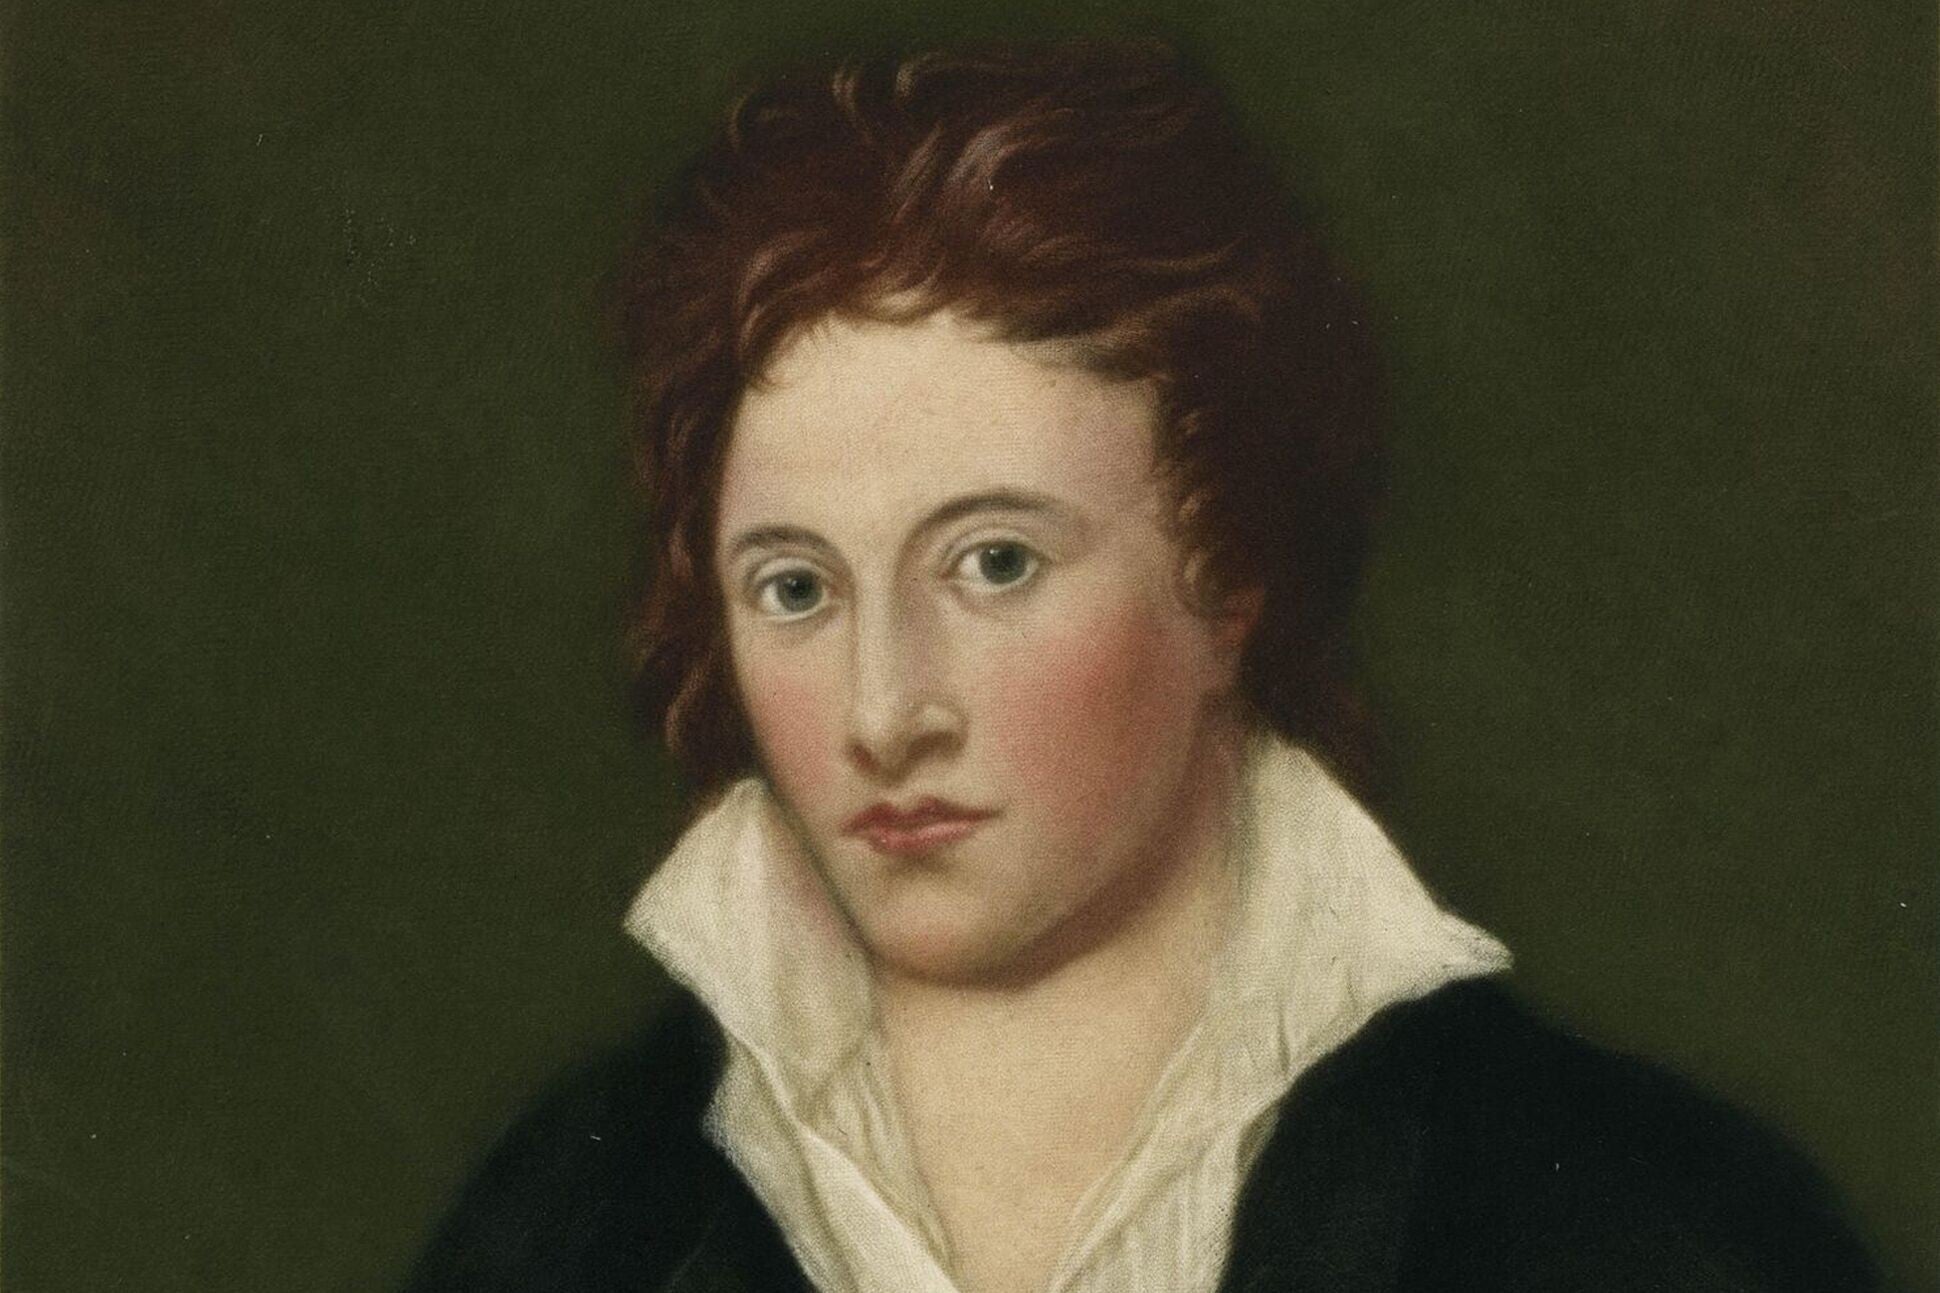 A work of Percy Bysshe Shelley that exemplifies English Romanticism in all its extremes.